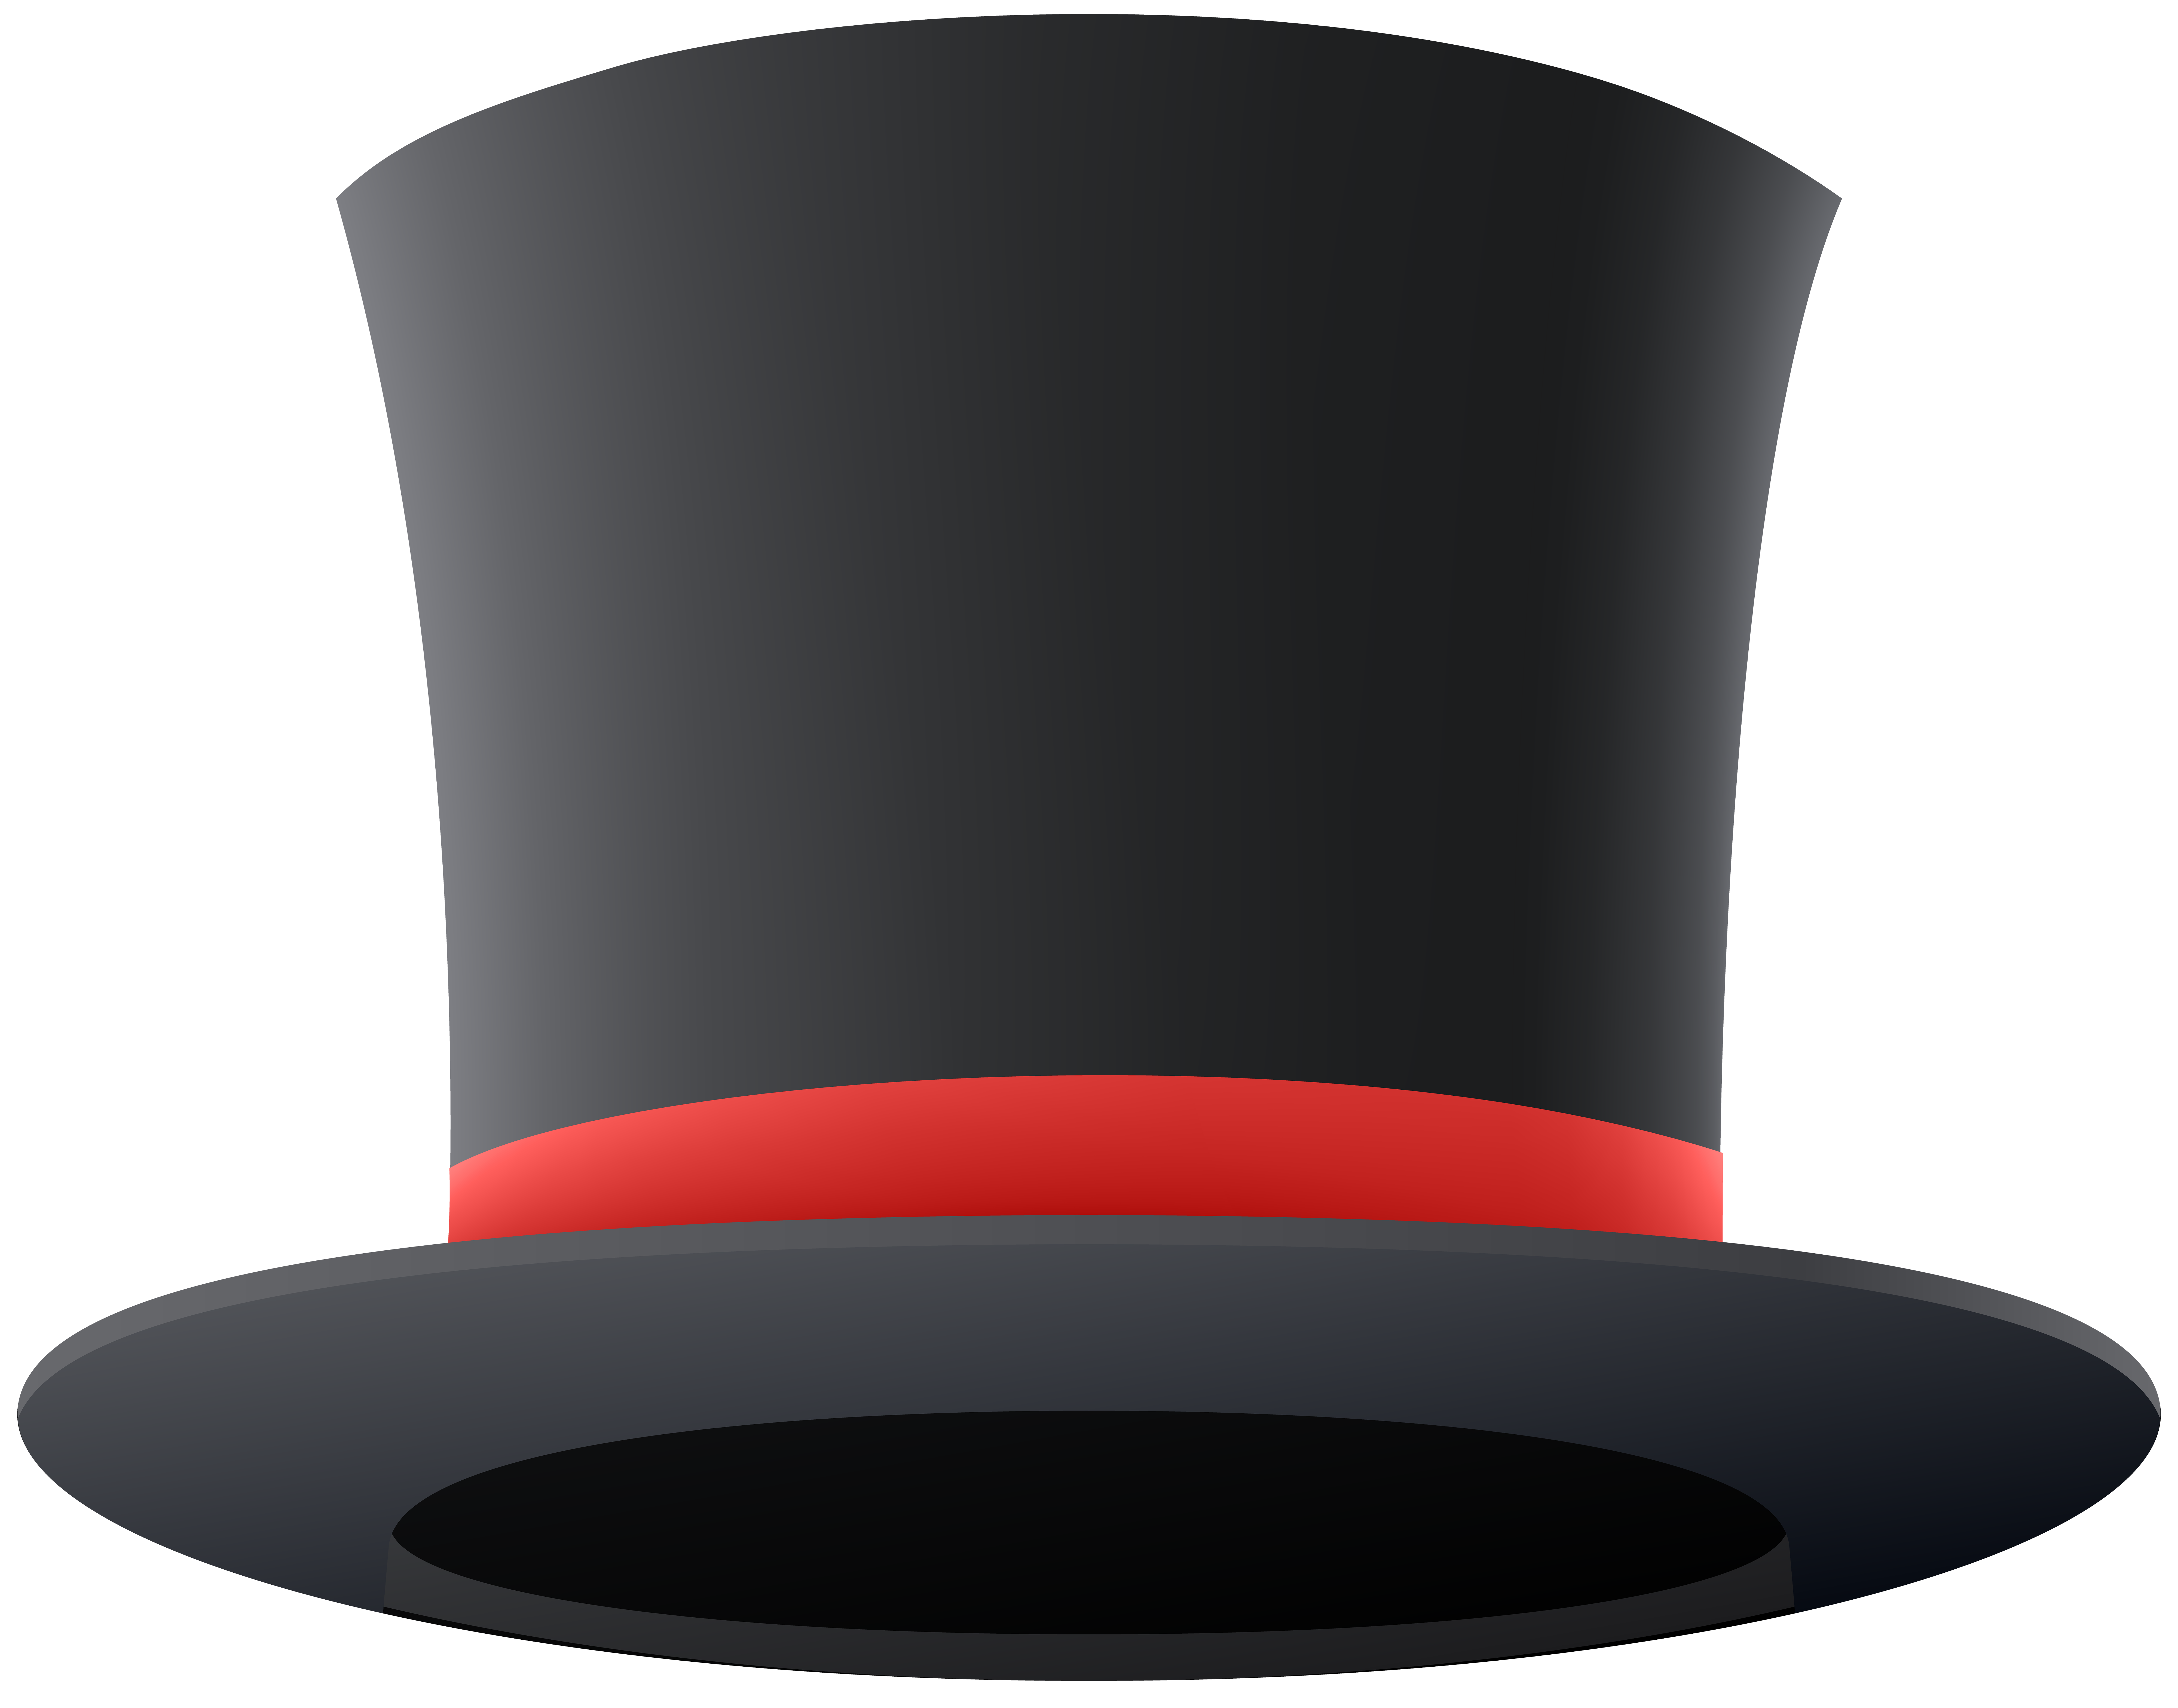 Free Cliparts Top Hat, Download Free Cliparts Top Hat png images, Free ...